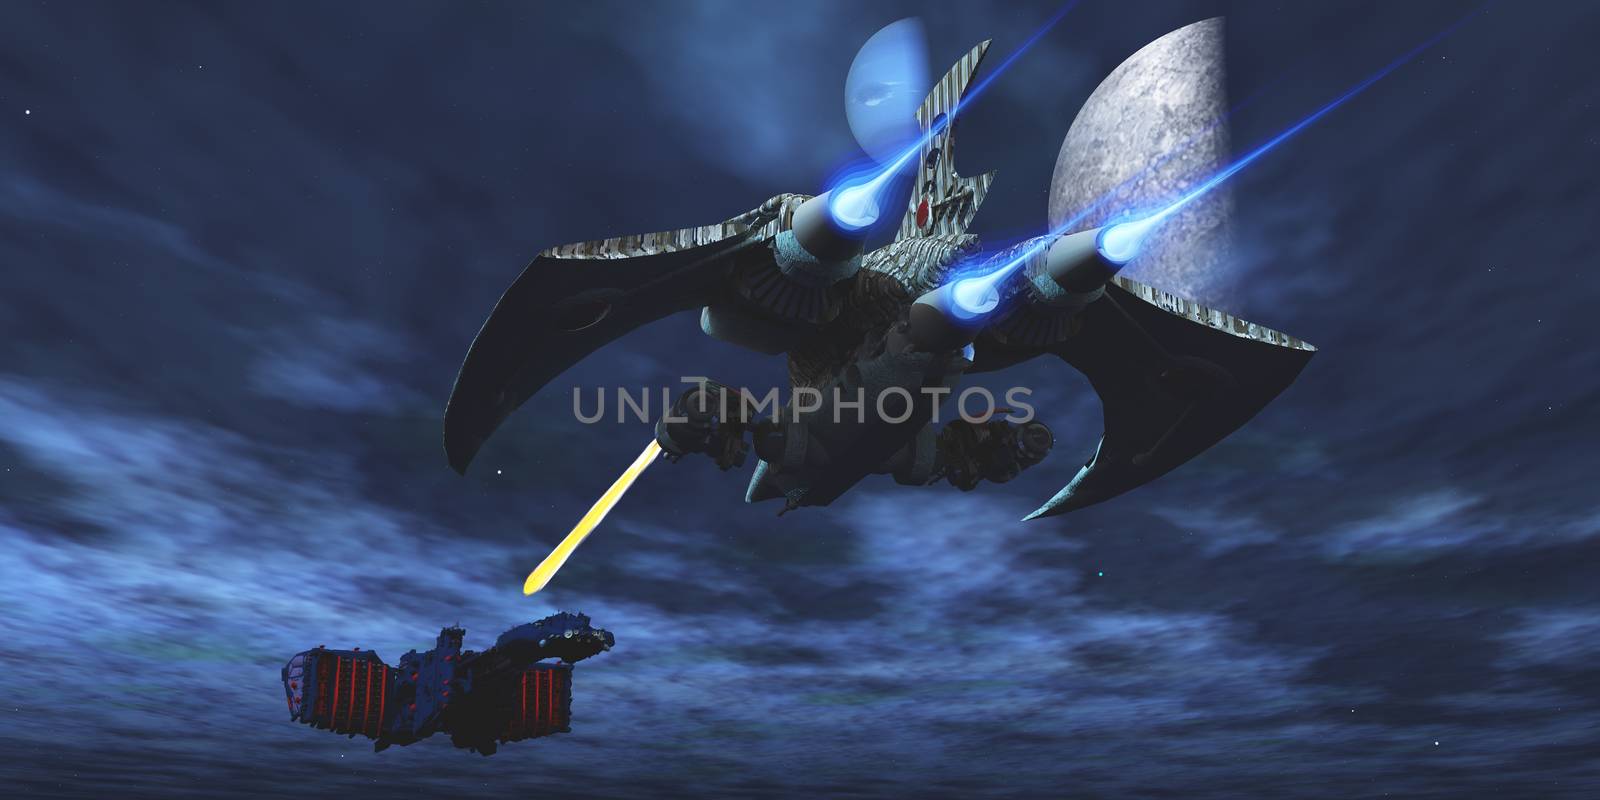 A lighter and more maneuverable spaceship blasts a laser beam toward a enemy battleship.